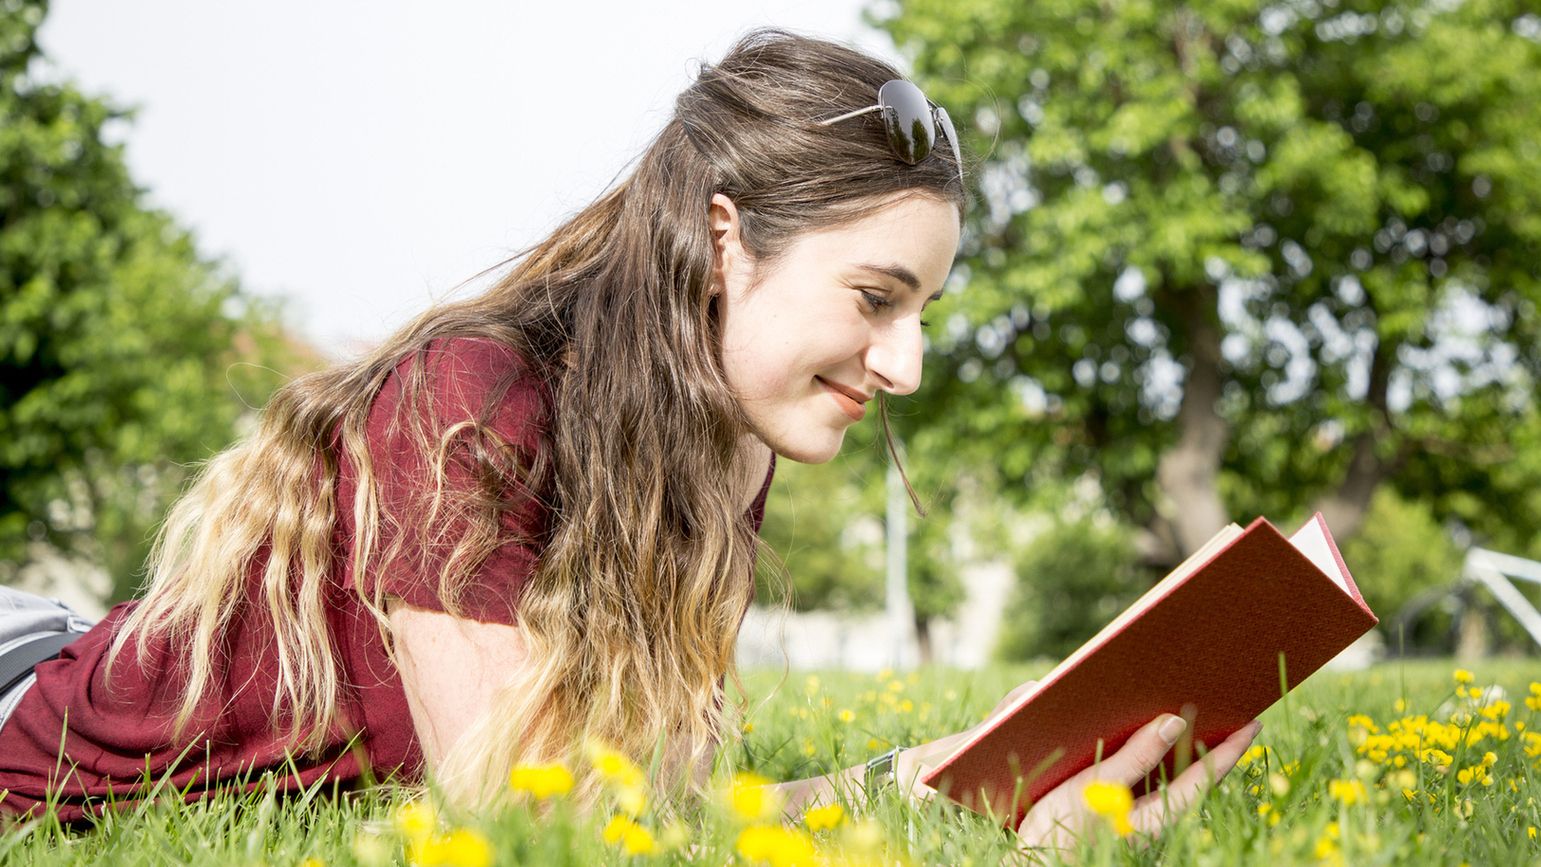 Woman reading book in field during spring (Getty Images)